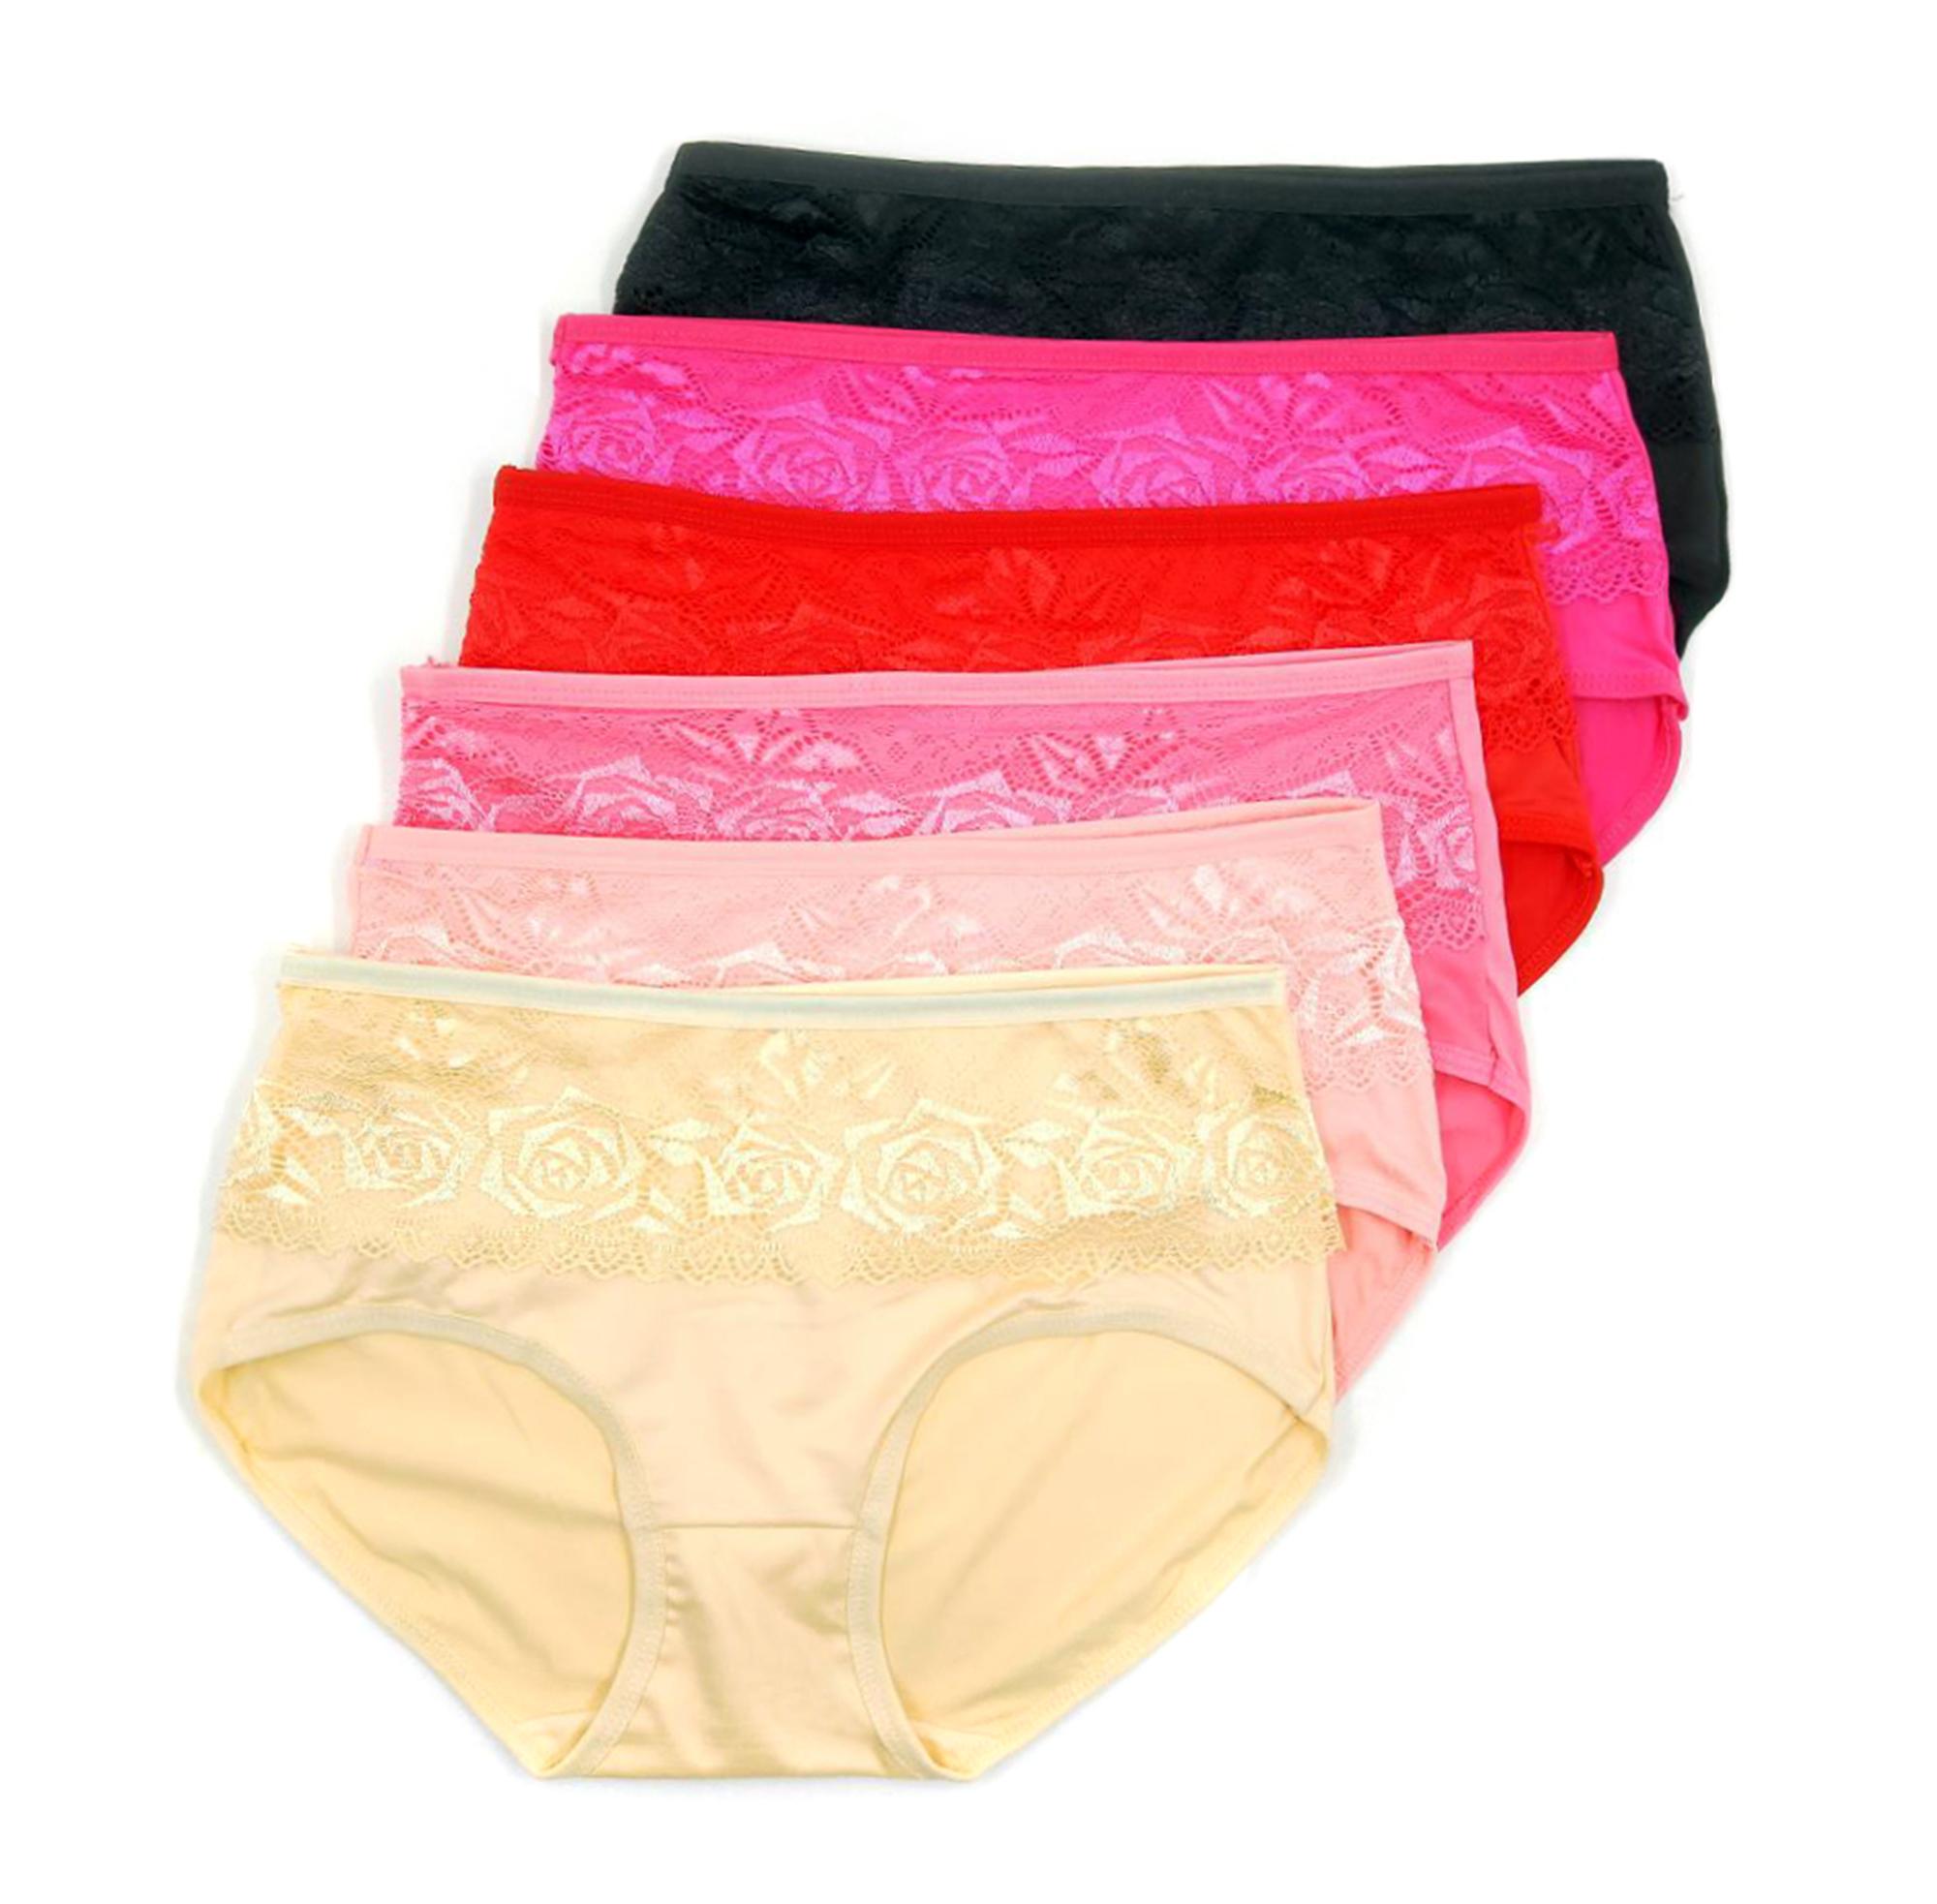 Buankoxy Women's Mid-Rise Stretch Cotton Panties Assorted Colors 